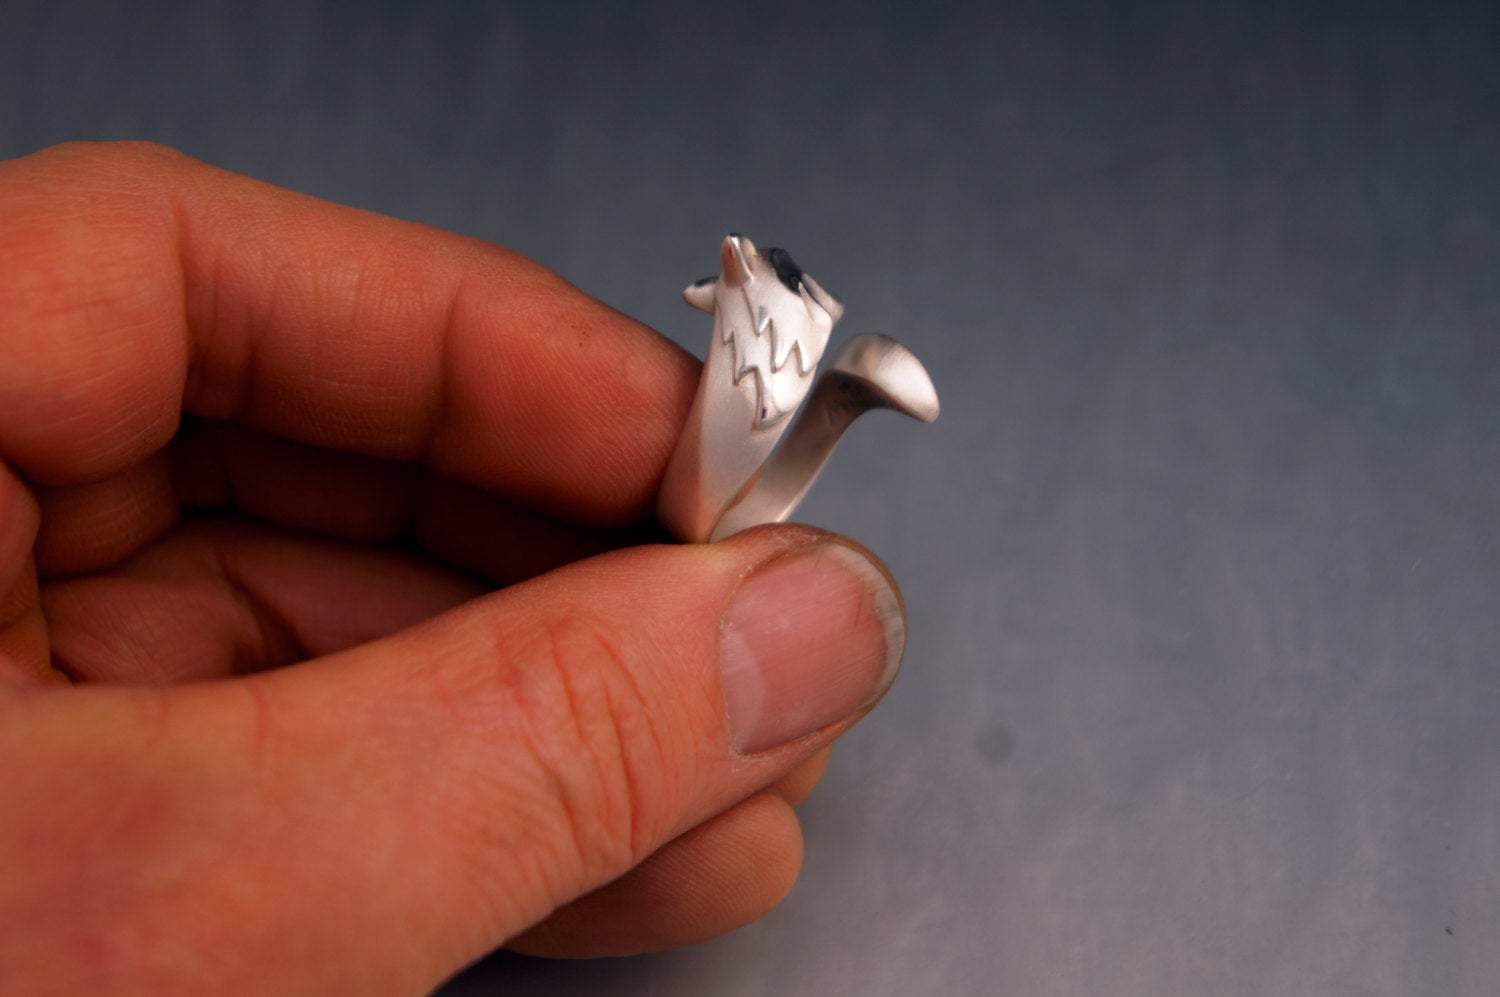 Timber Wolf Ring. Silver Ring. Sterling Silver Wolf Ring. Michael Tatom. Sorrel Sky Gallery. 